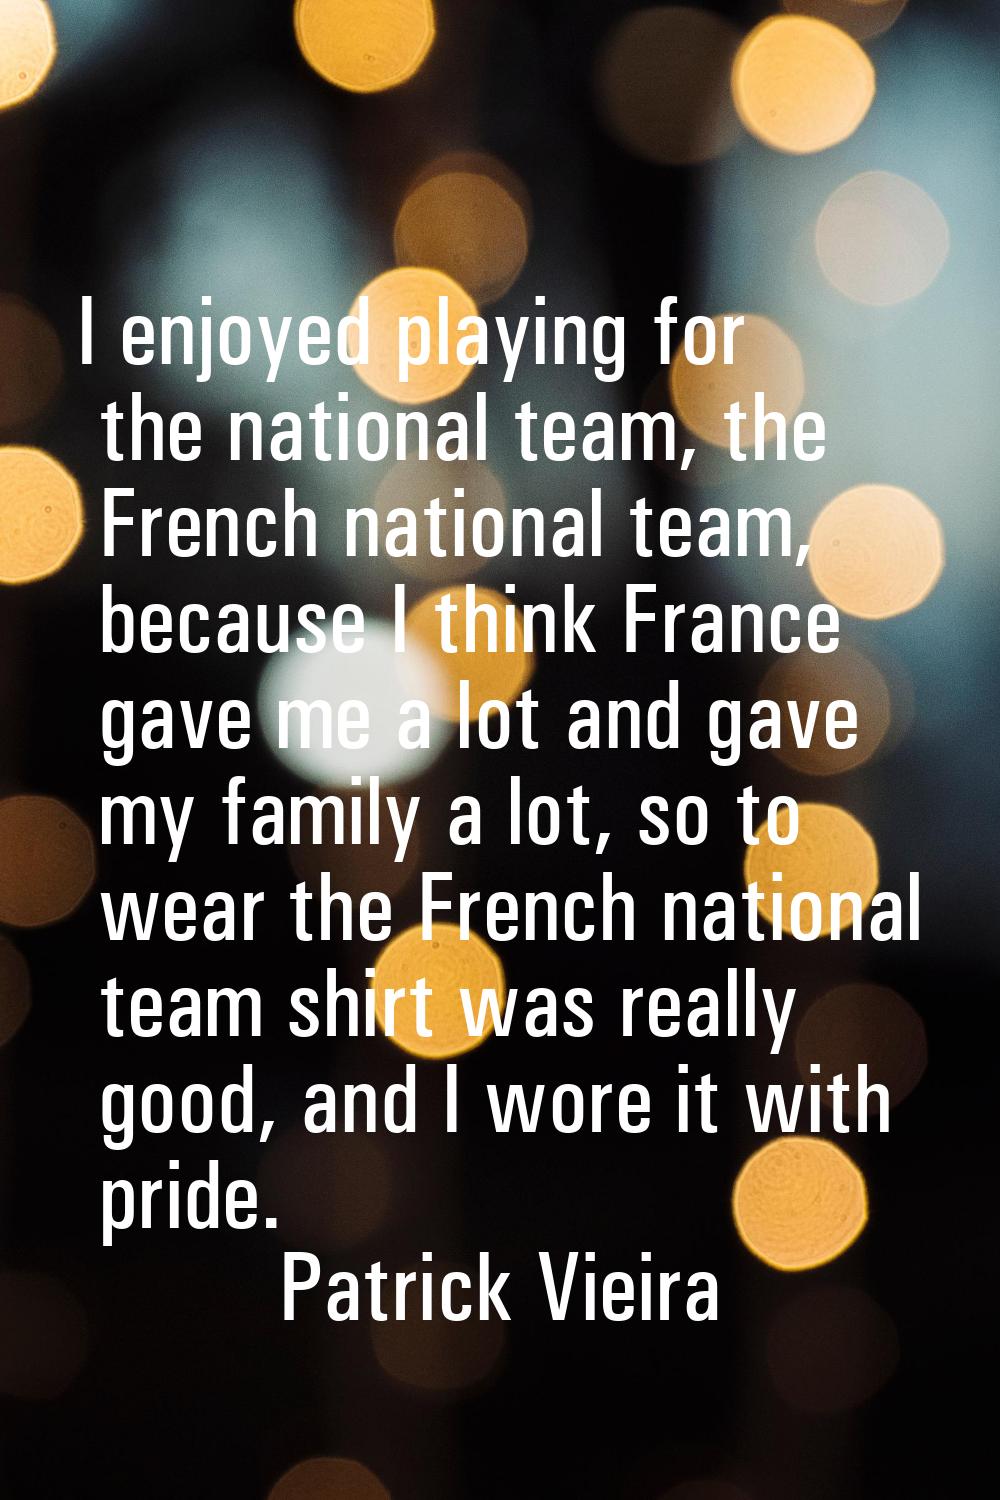 I enjoyed playing for the national team, the French national team, because I think France gave me a